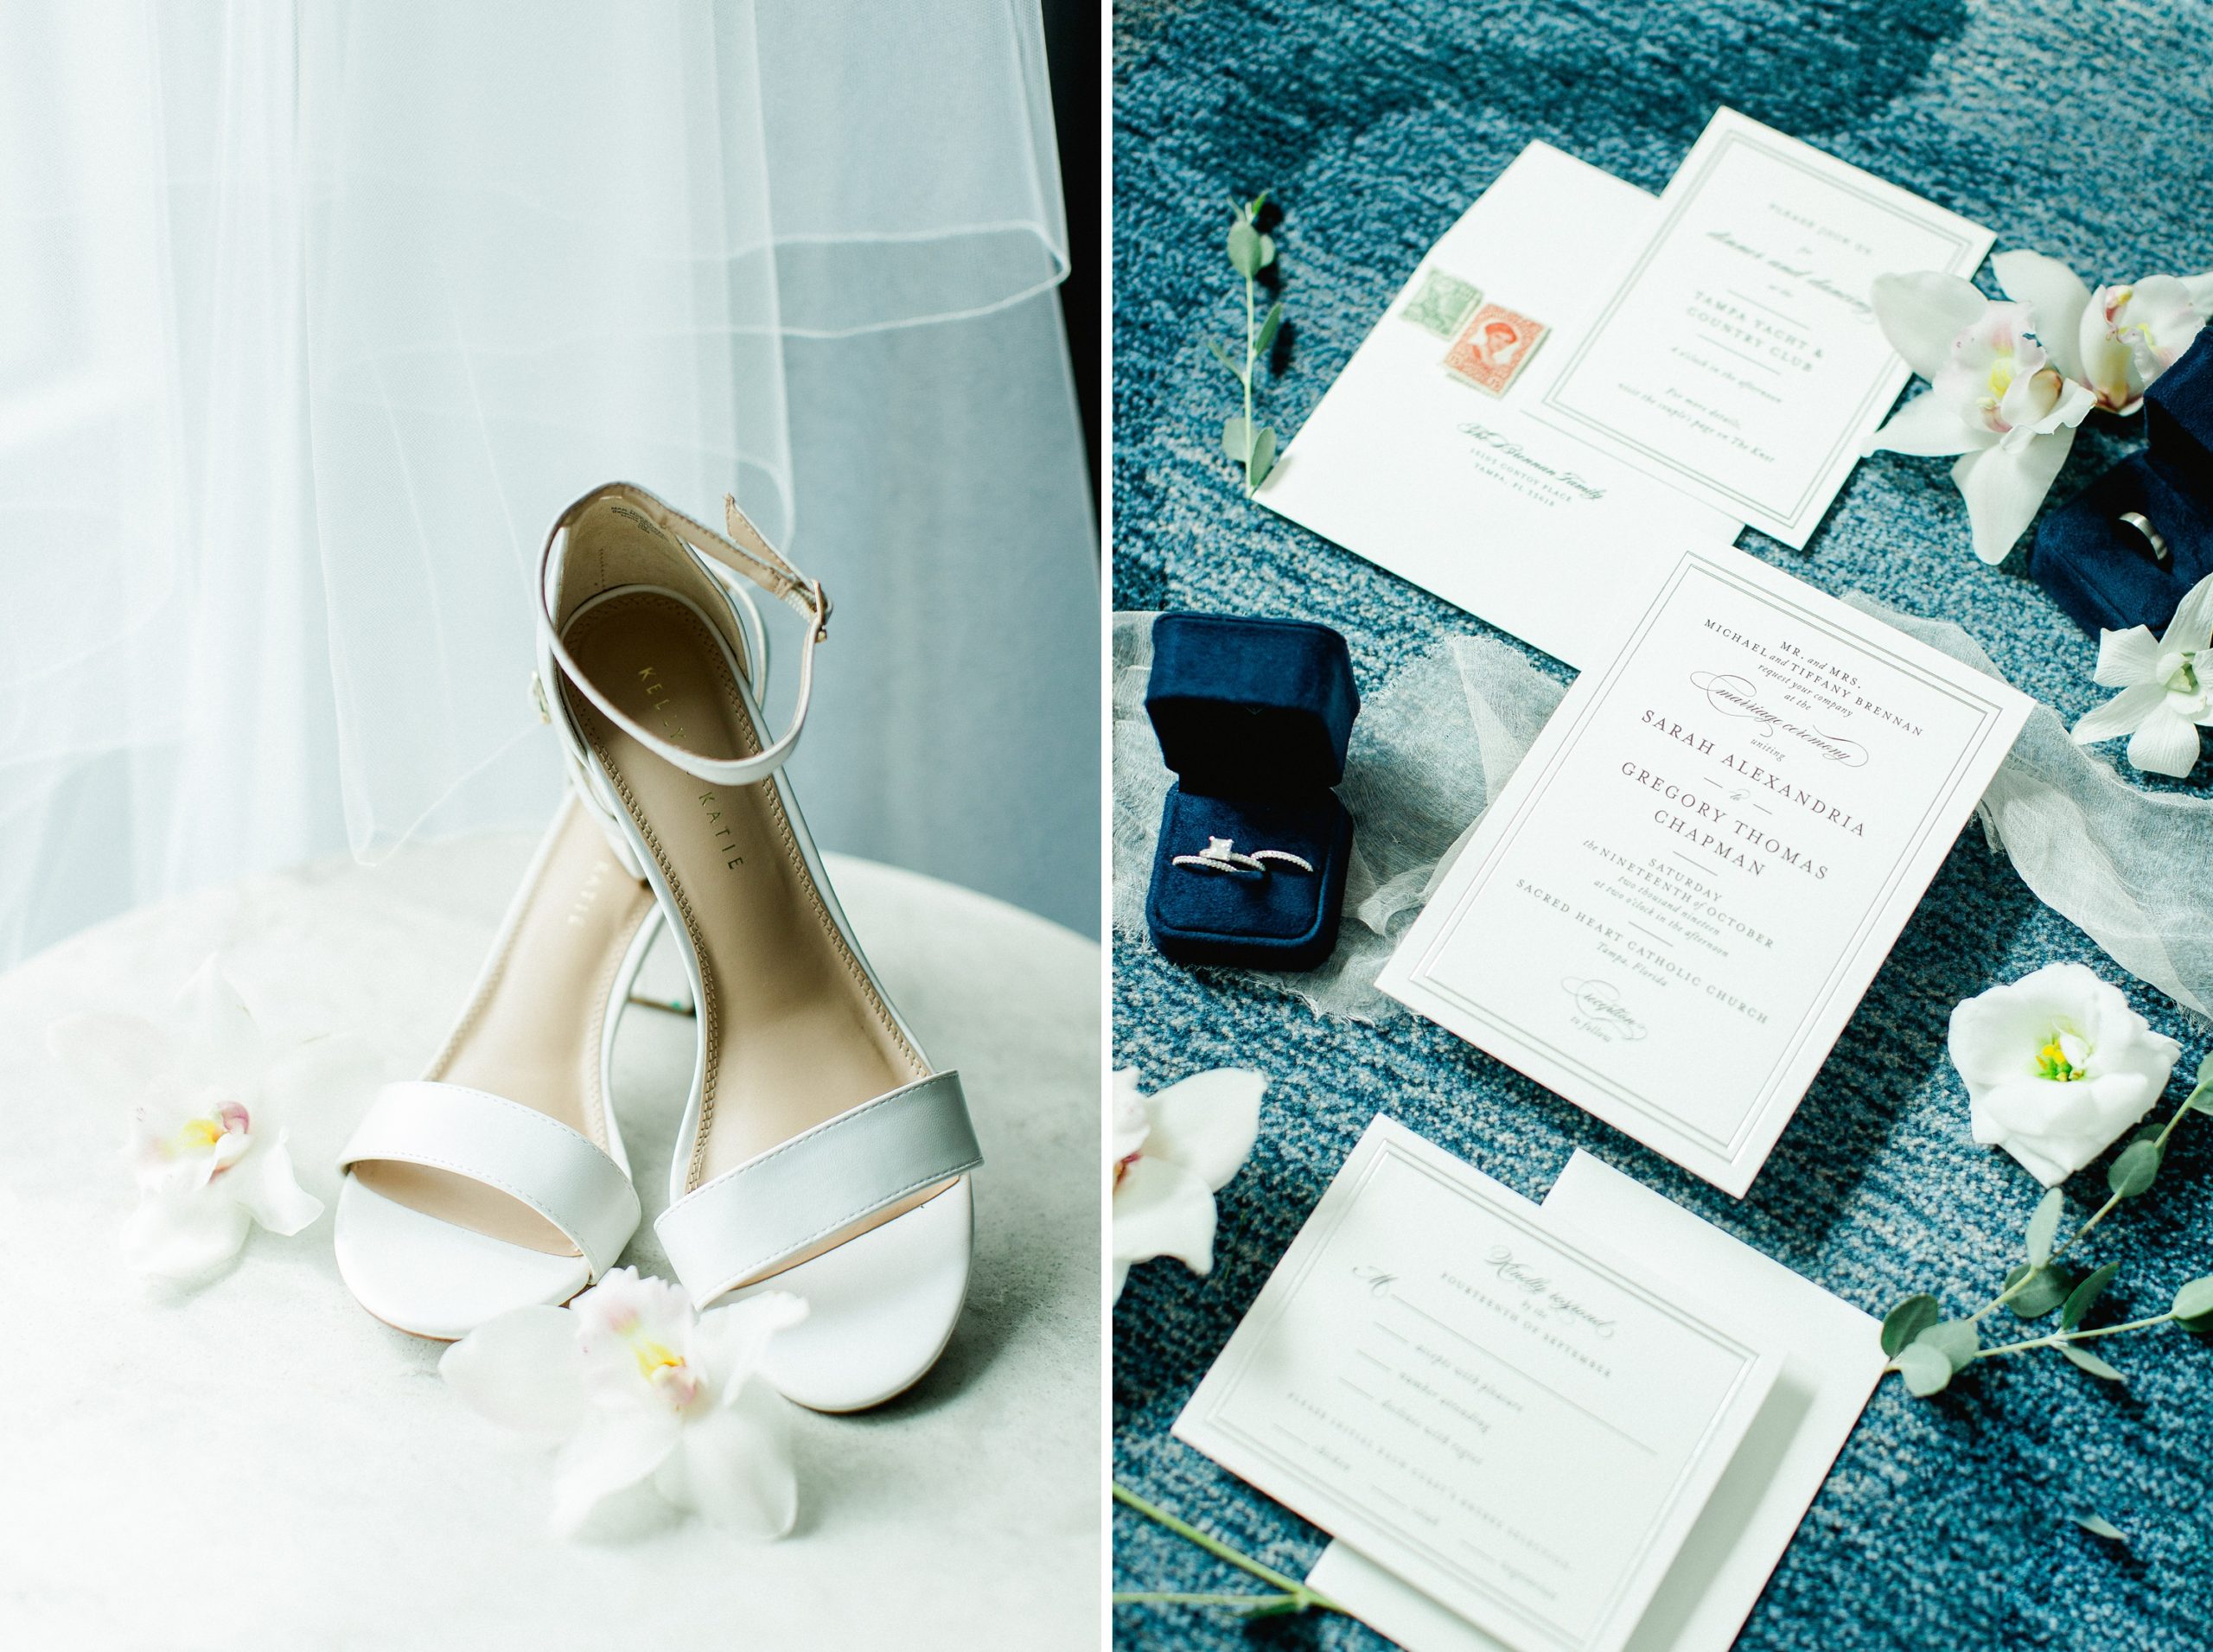 Tampa Yacht Club Wedding Photographer | © Ailyn LaTorre Photography 2019